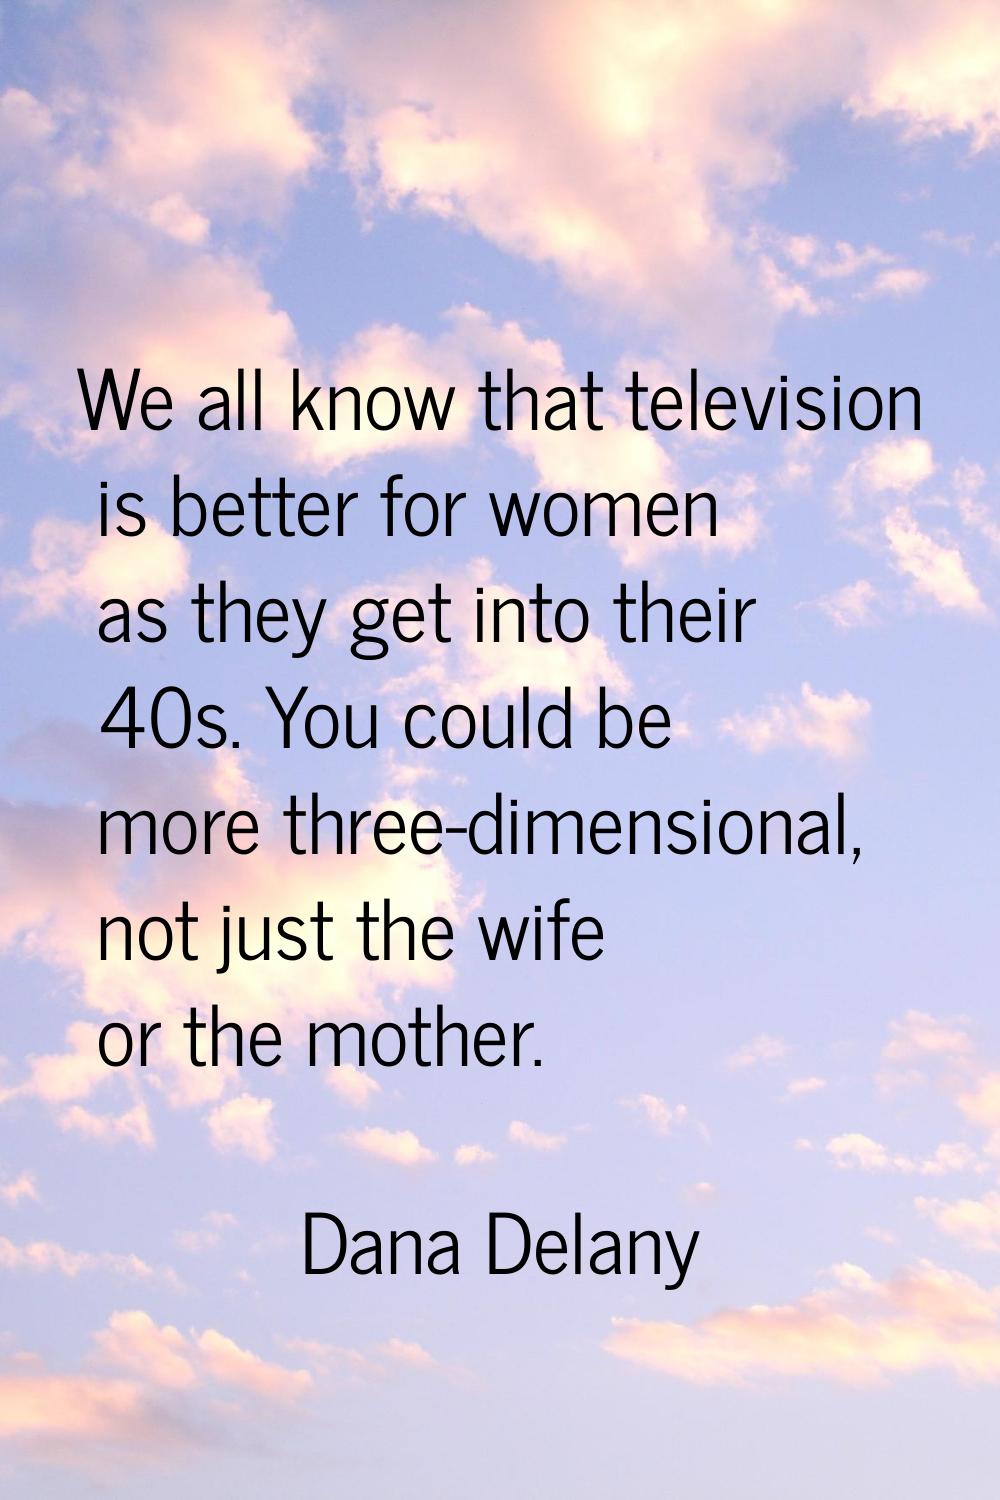 We all know that television is better for women as they get into their 40s. You could be more three